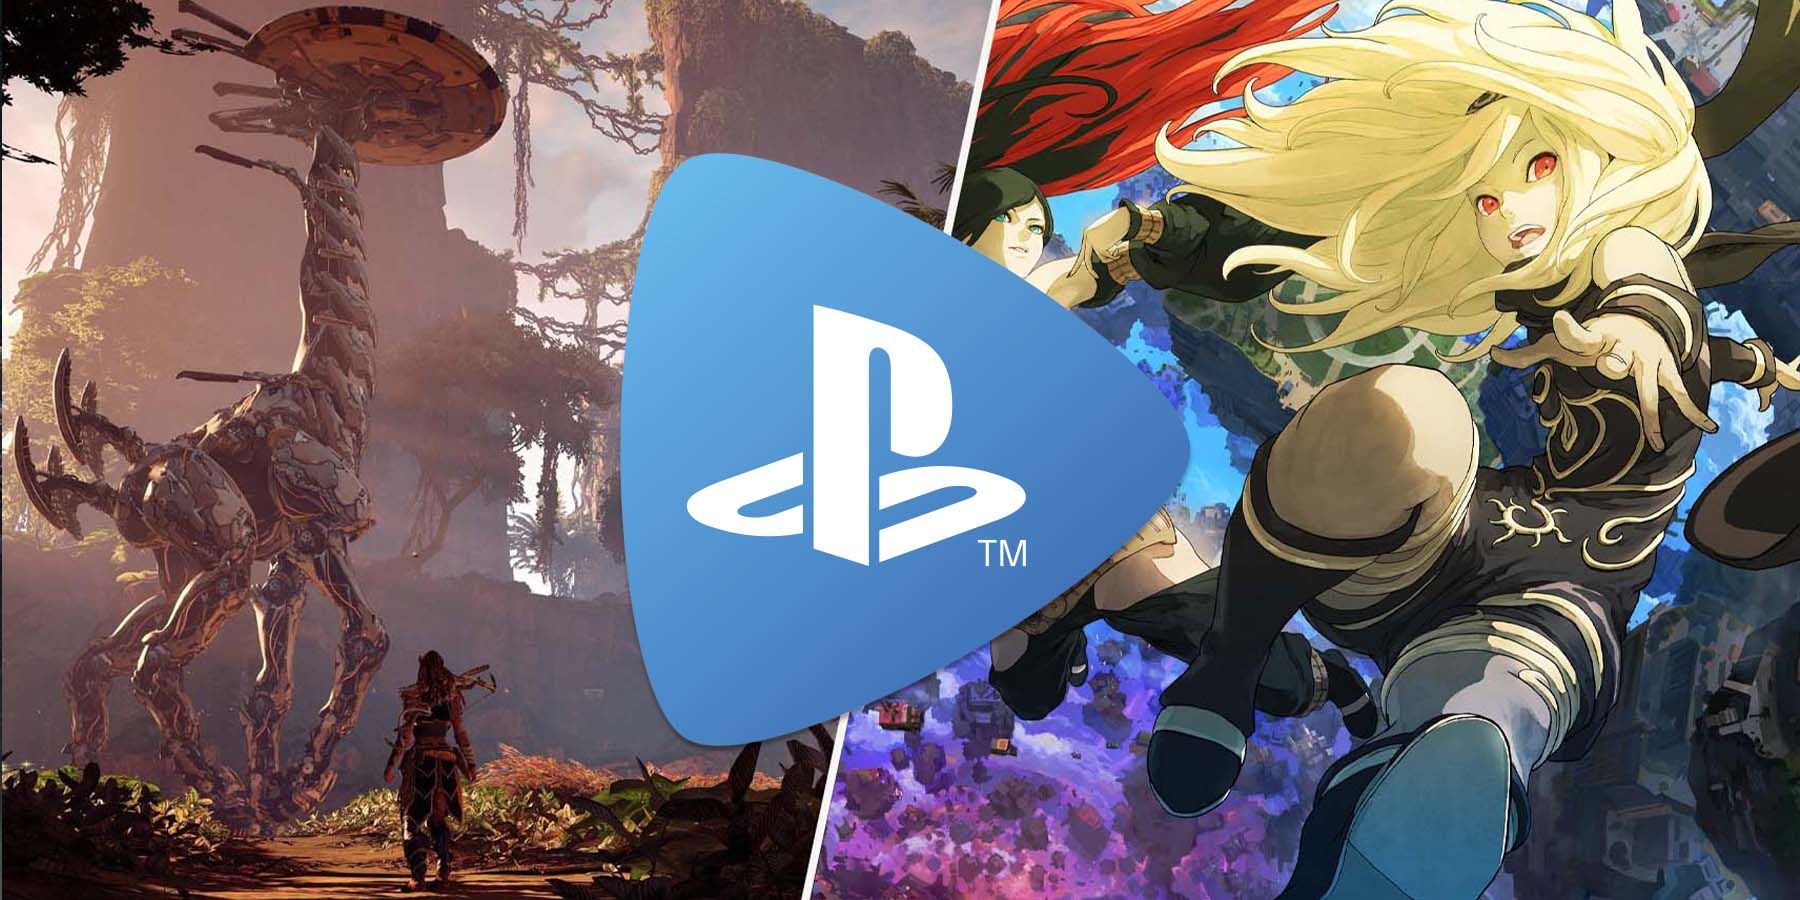 best games on ps now